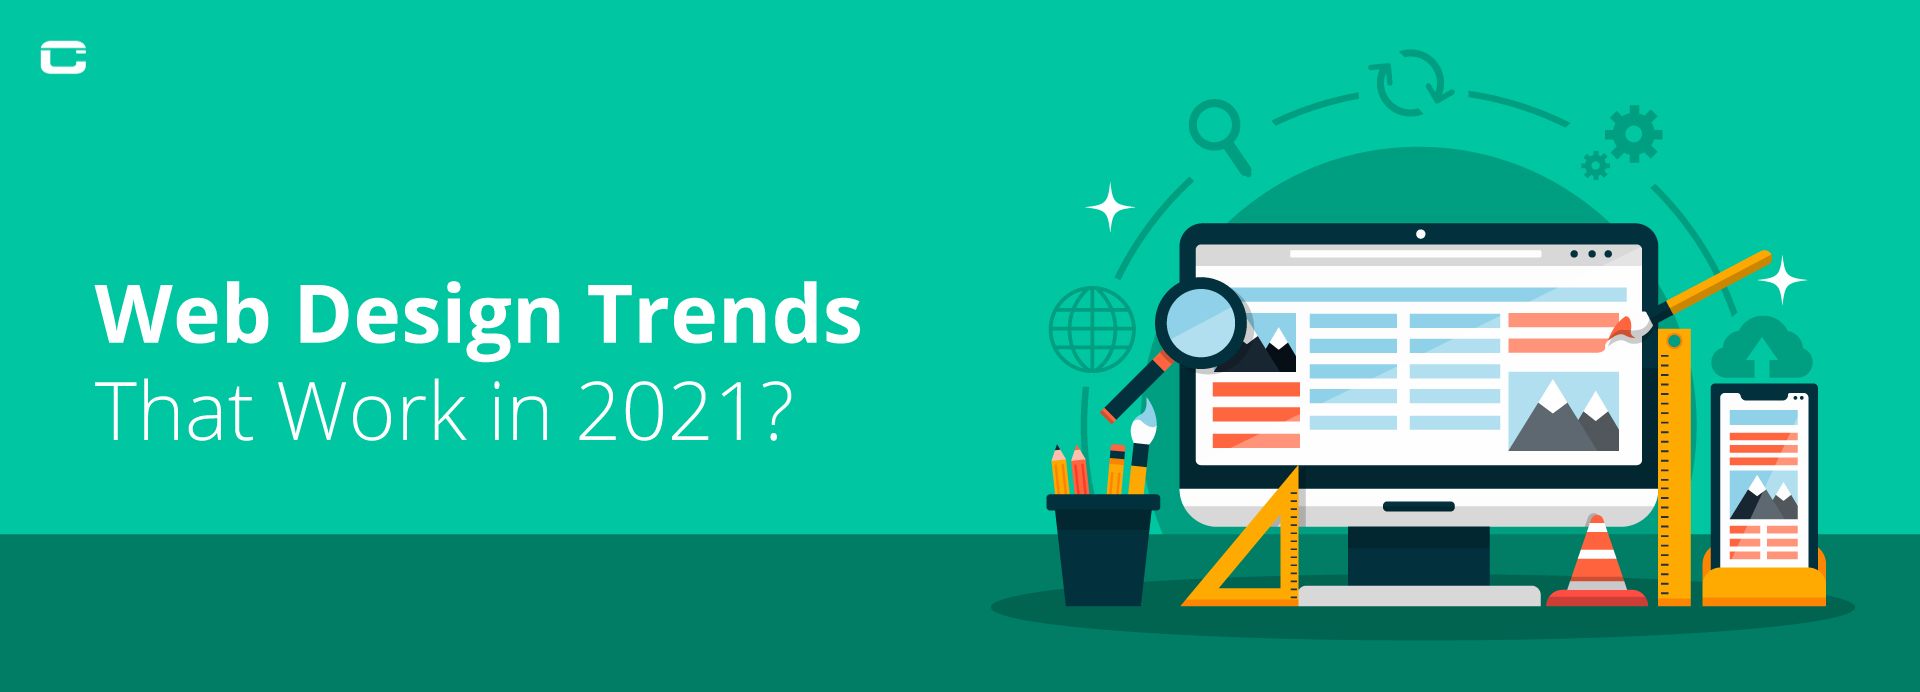 Web Design Trends That Work in 2021?